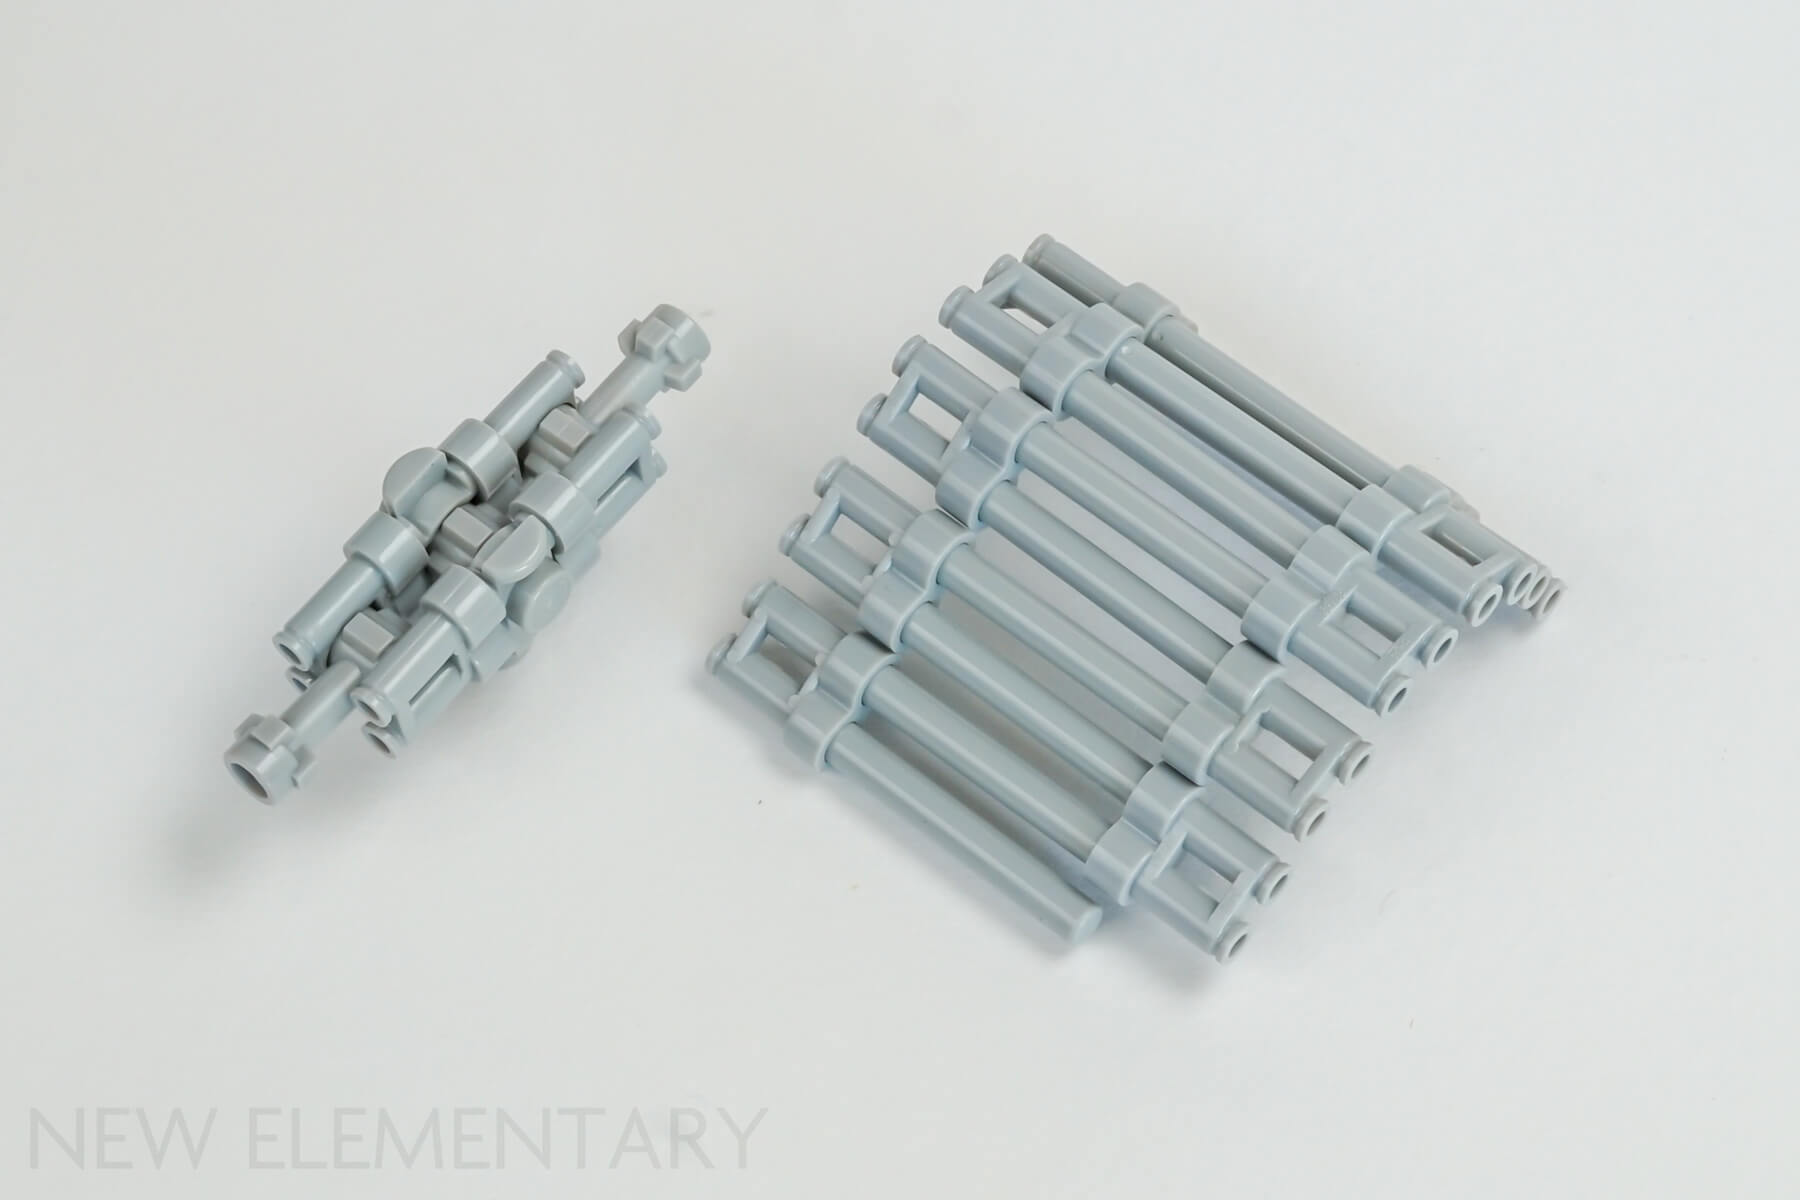 Old Elementary: A closer look at LEGO binoculars, part 30162 | New 